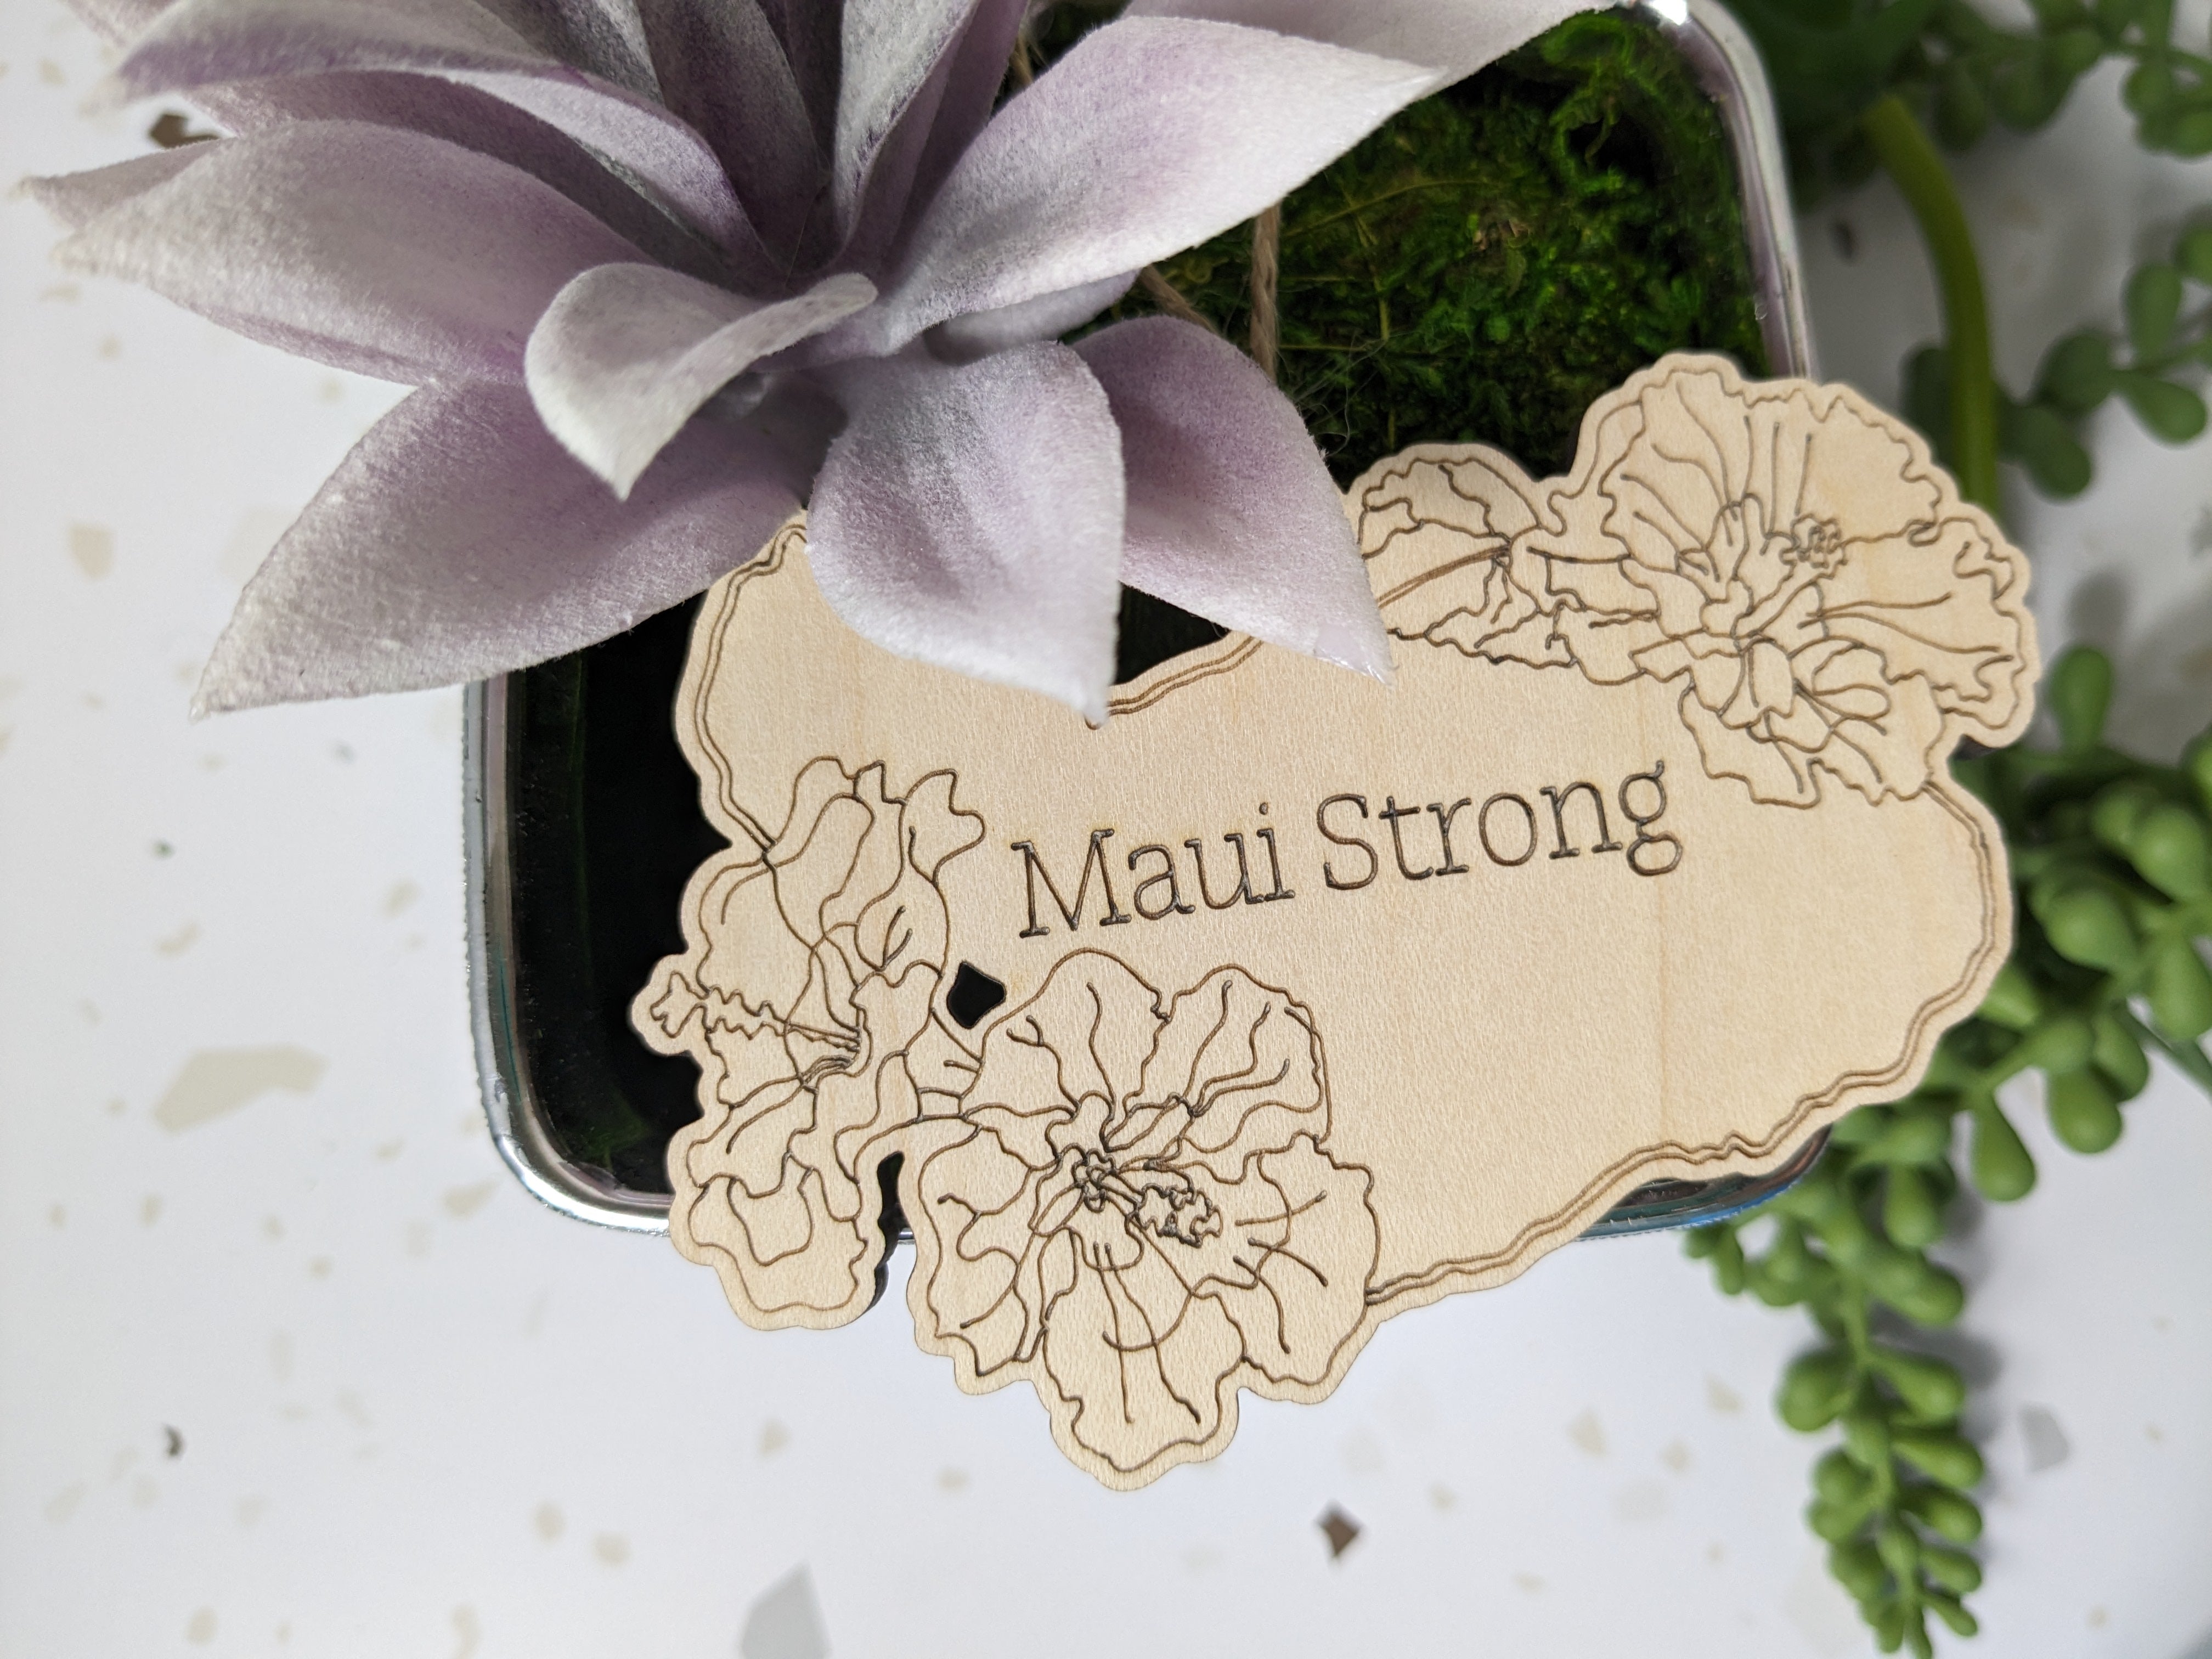 Maui Strong Ornament